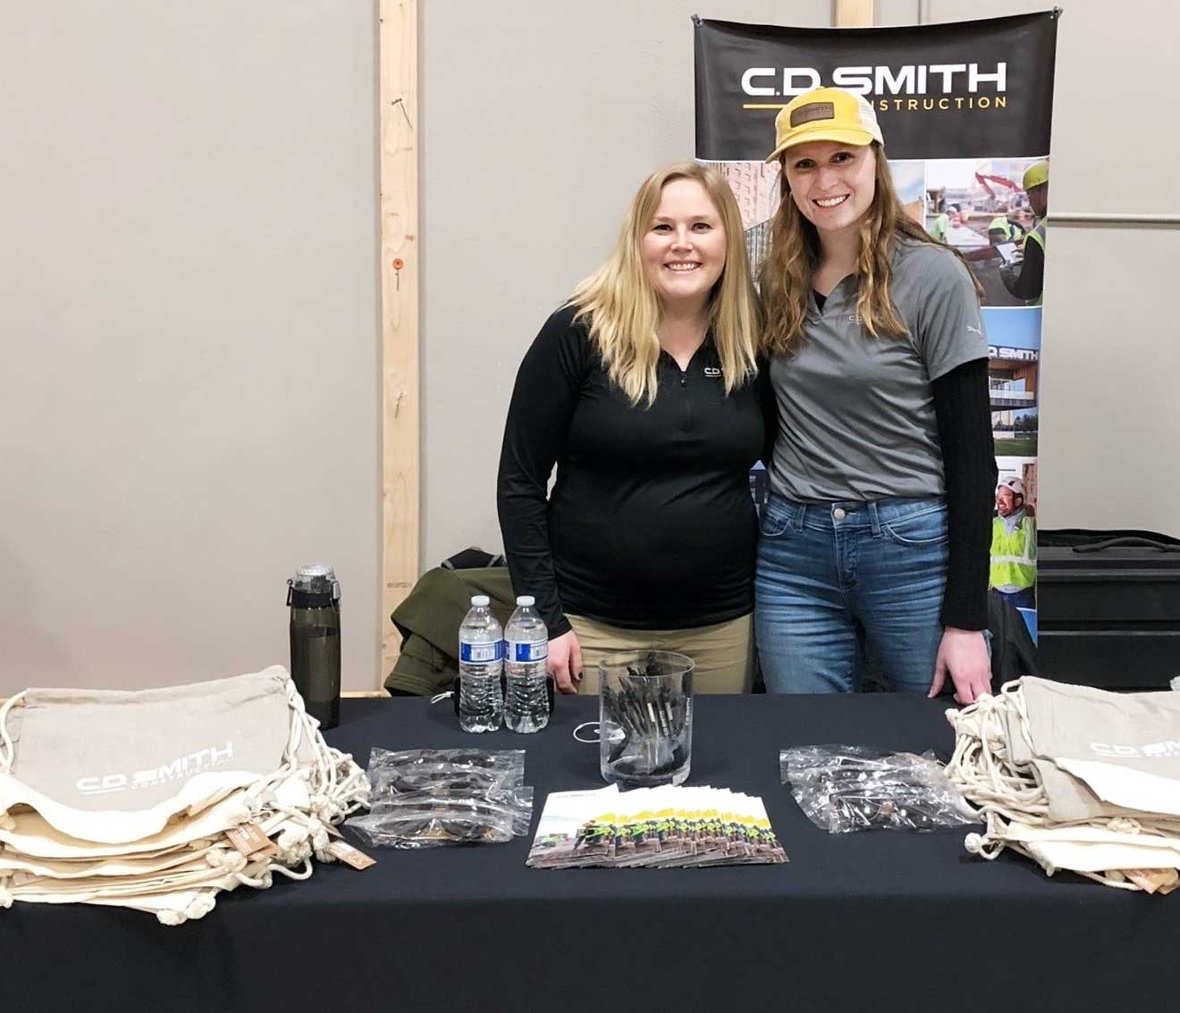 C.D. Smith Construction at Women in the Trades Career Fair in Madison Wisconsin